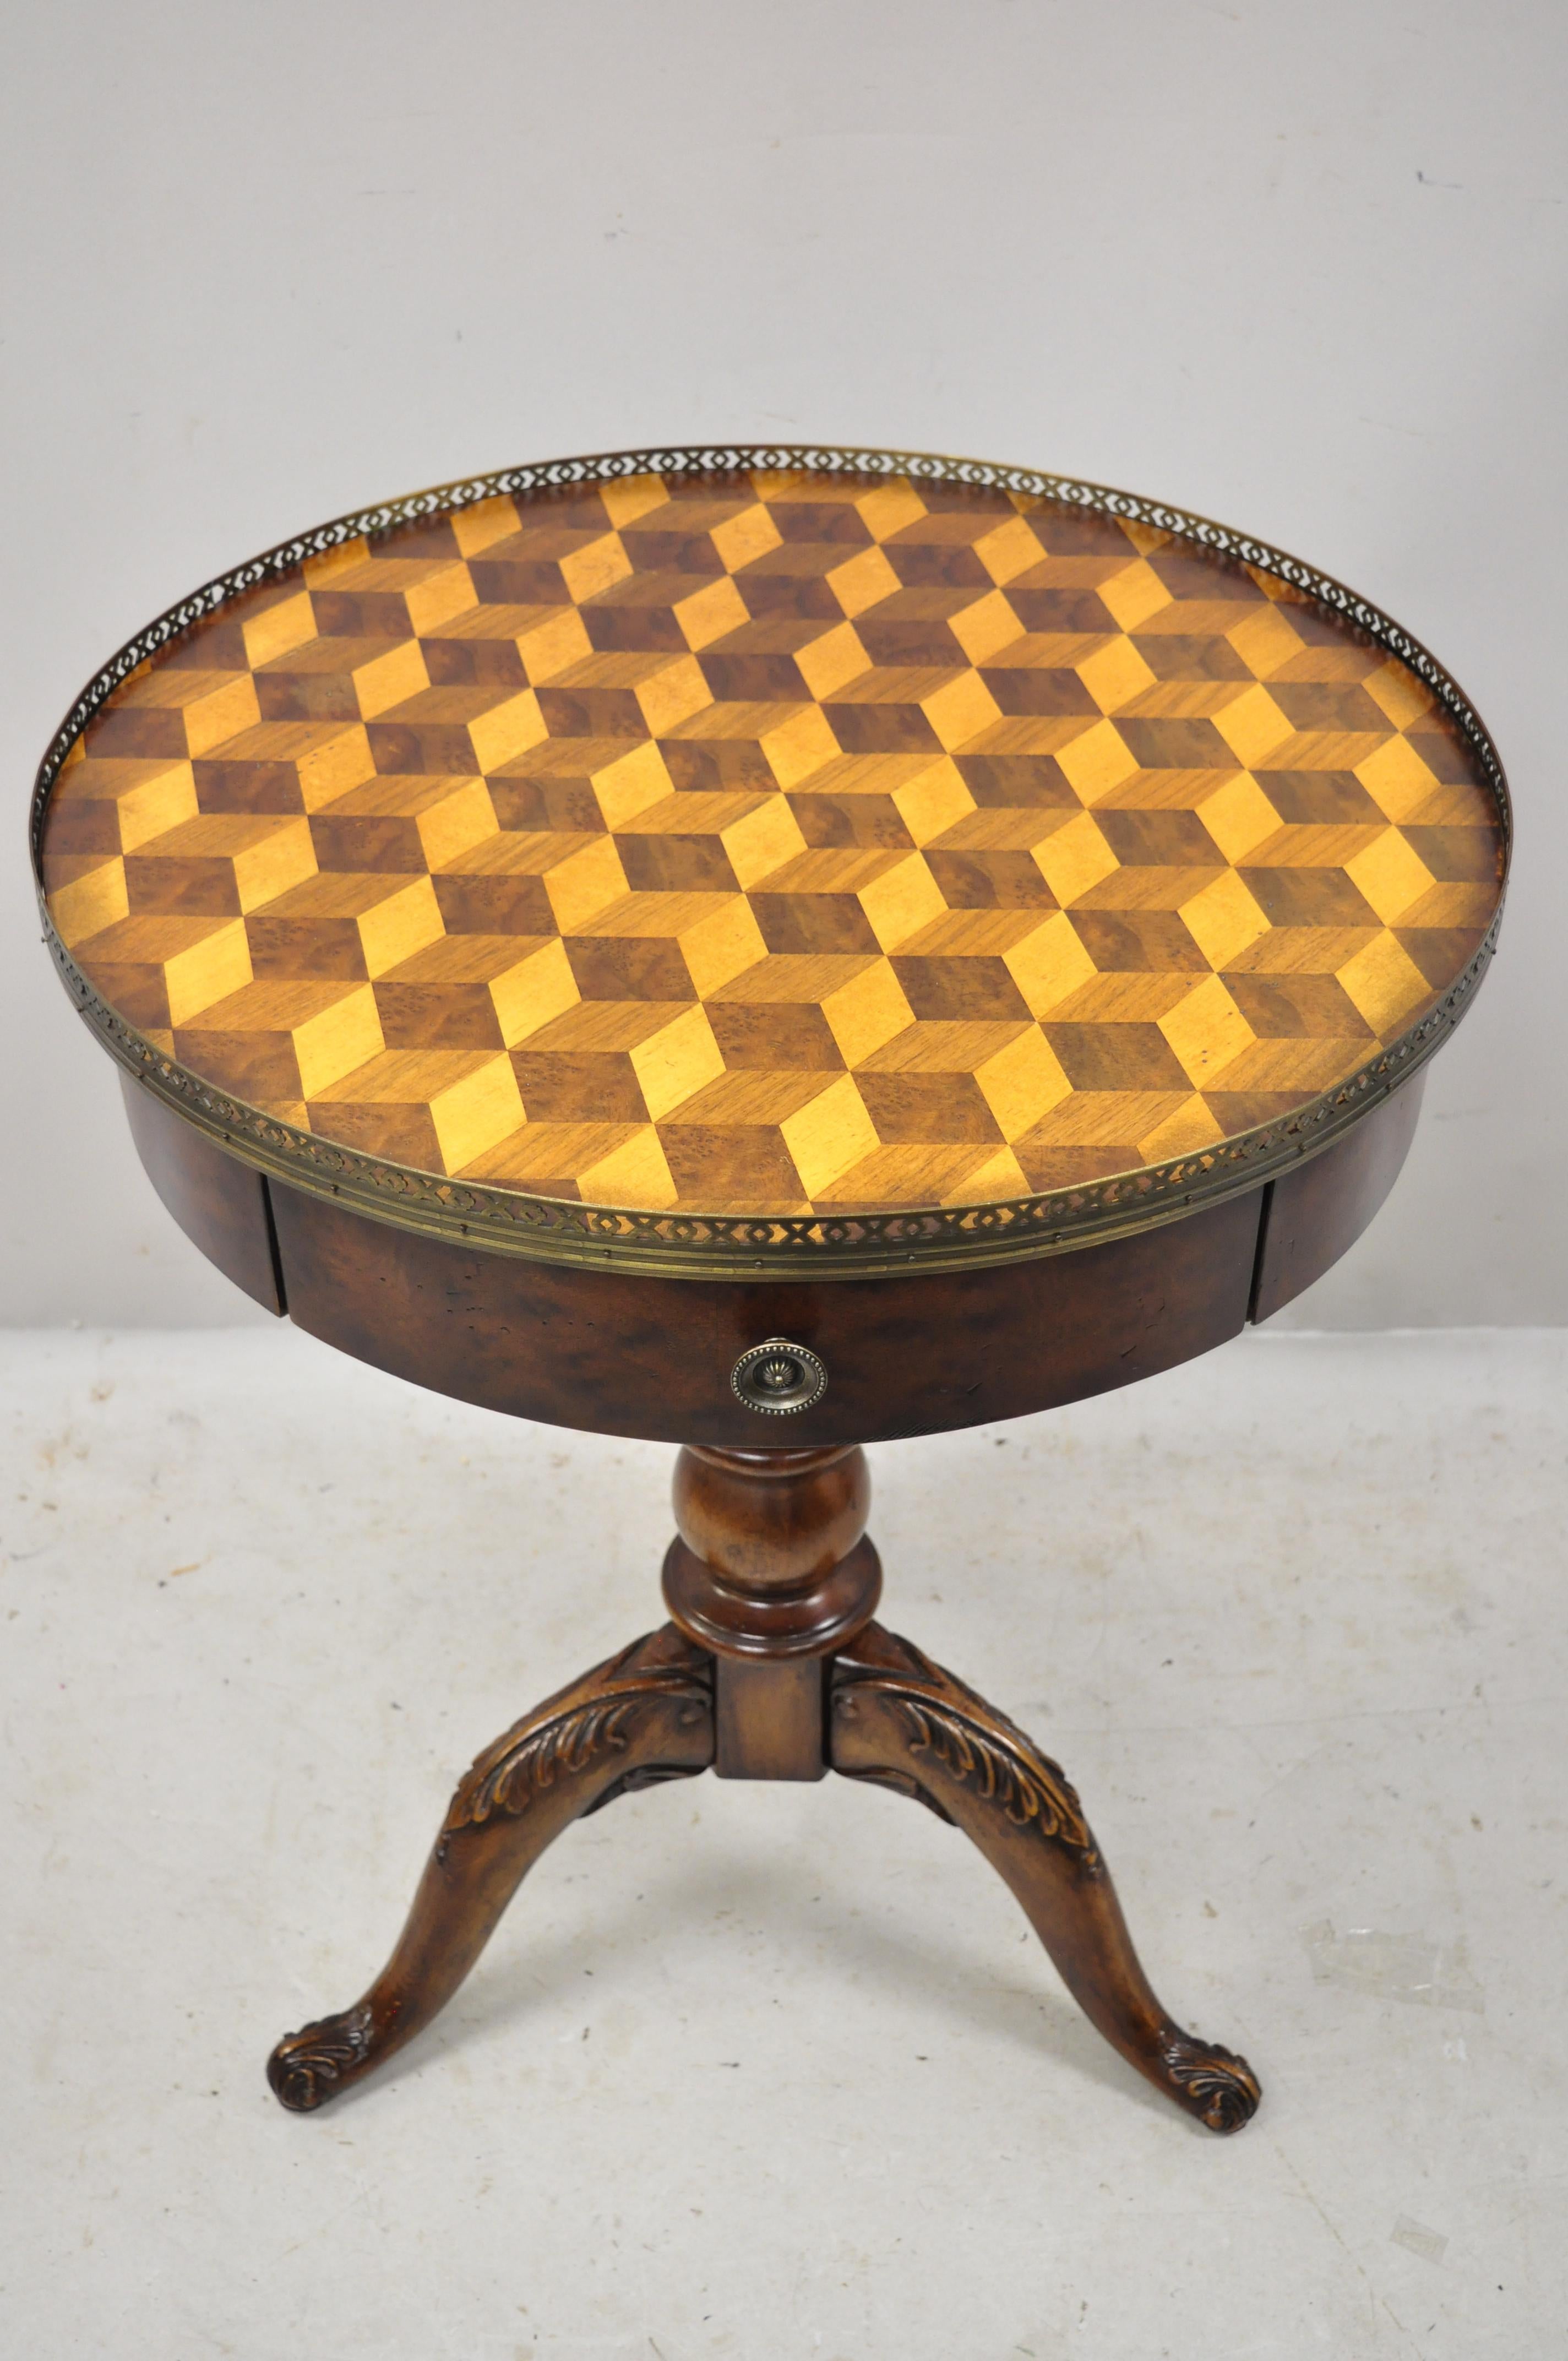 Late 20th century marquetry geometric inlay Regency style round lamp side drum table. Item features 3 dimensional design marquetry inlaid geometric top, nicely carved details, 1 drawer, very nice item, great style and form, circa 21st century.